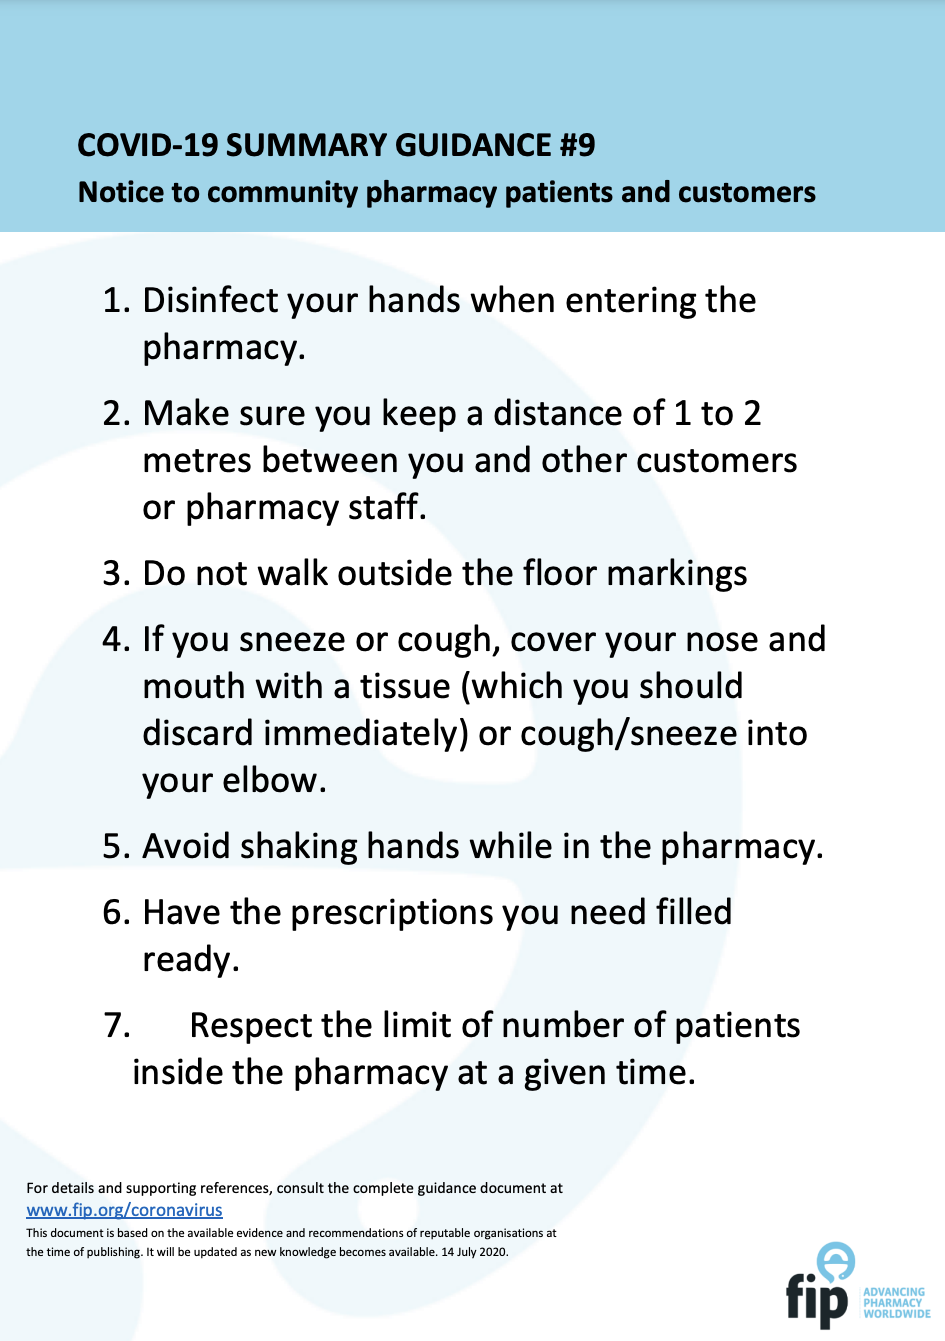 COVID-19 Summary Guidance #9: Notice to community pharmacy patients and customers (2020) Thumbnail